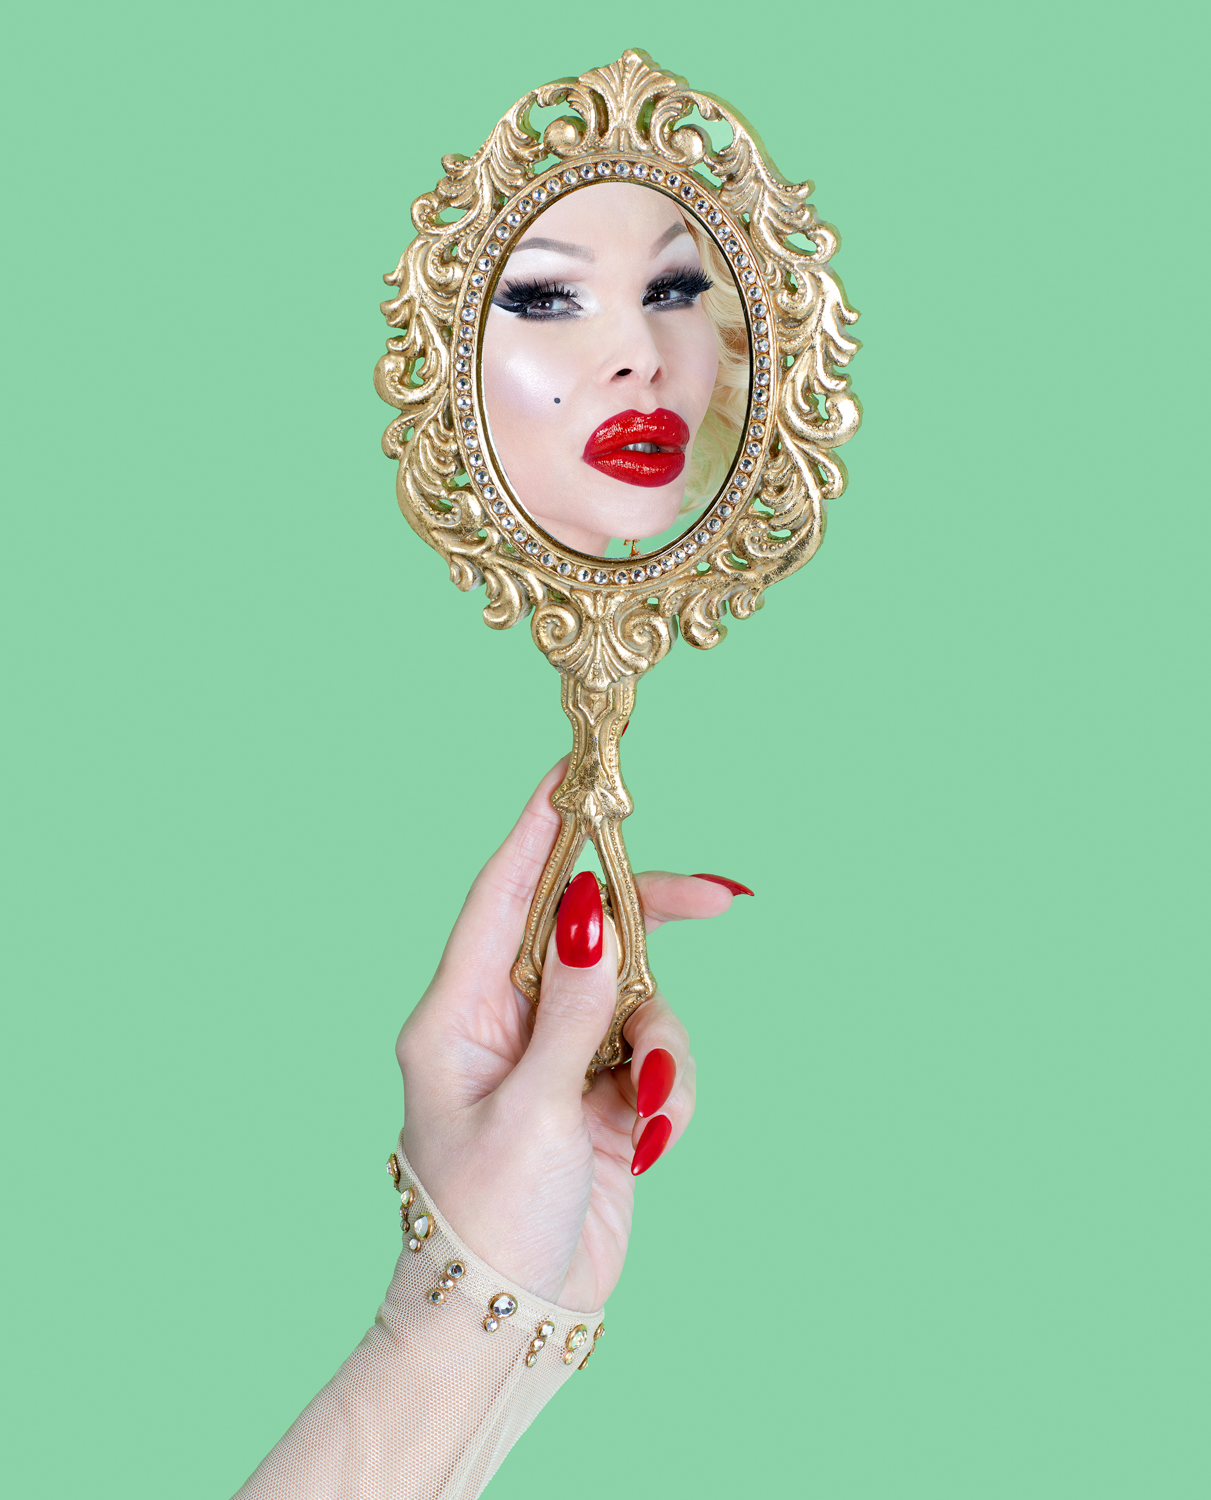 Amanda Lepore by May Lin Le Goff